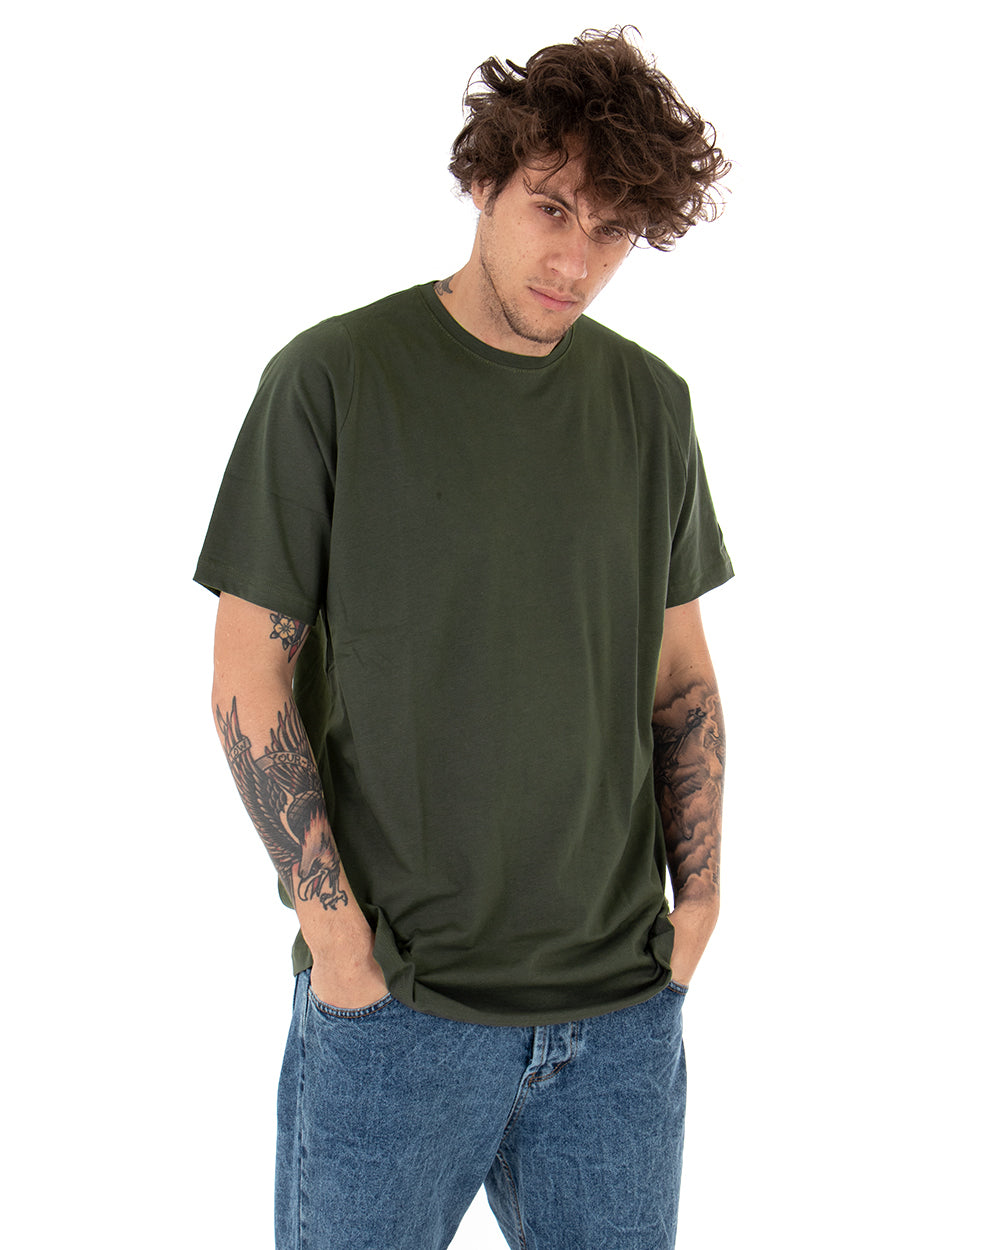 Men's Oversized T-Shirt Solid Color Military Green Short Sleeves Round Neck Cotton Shirt GIOSAL